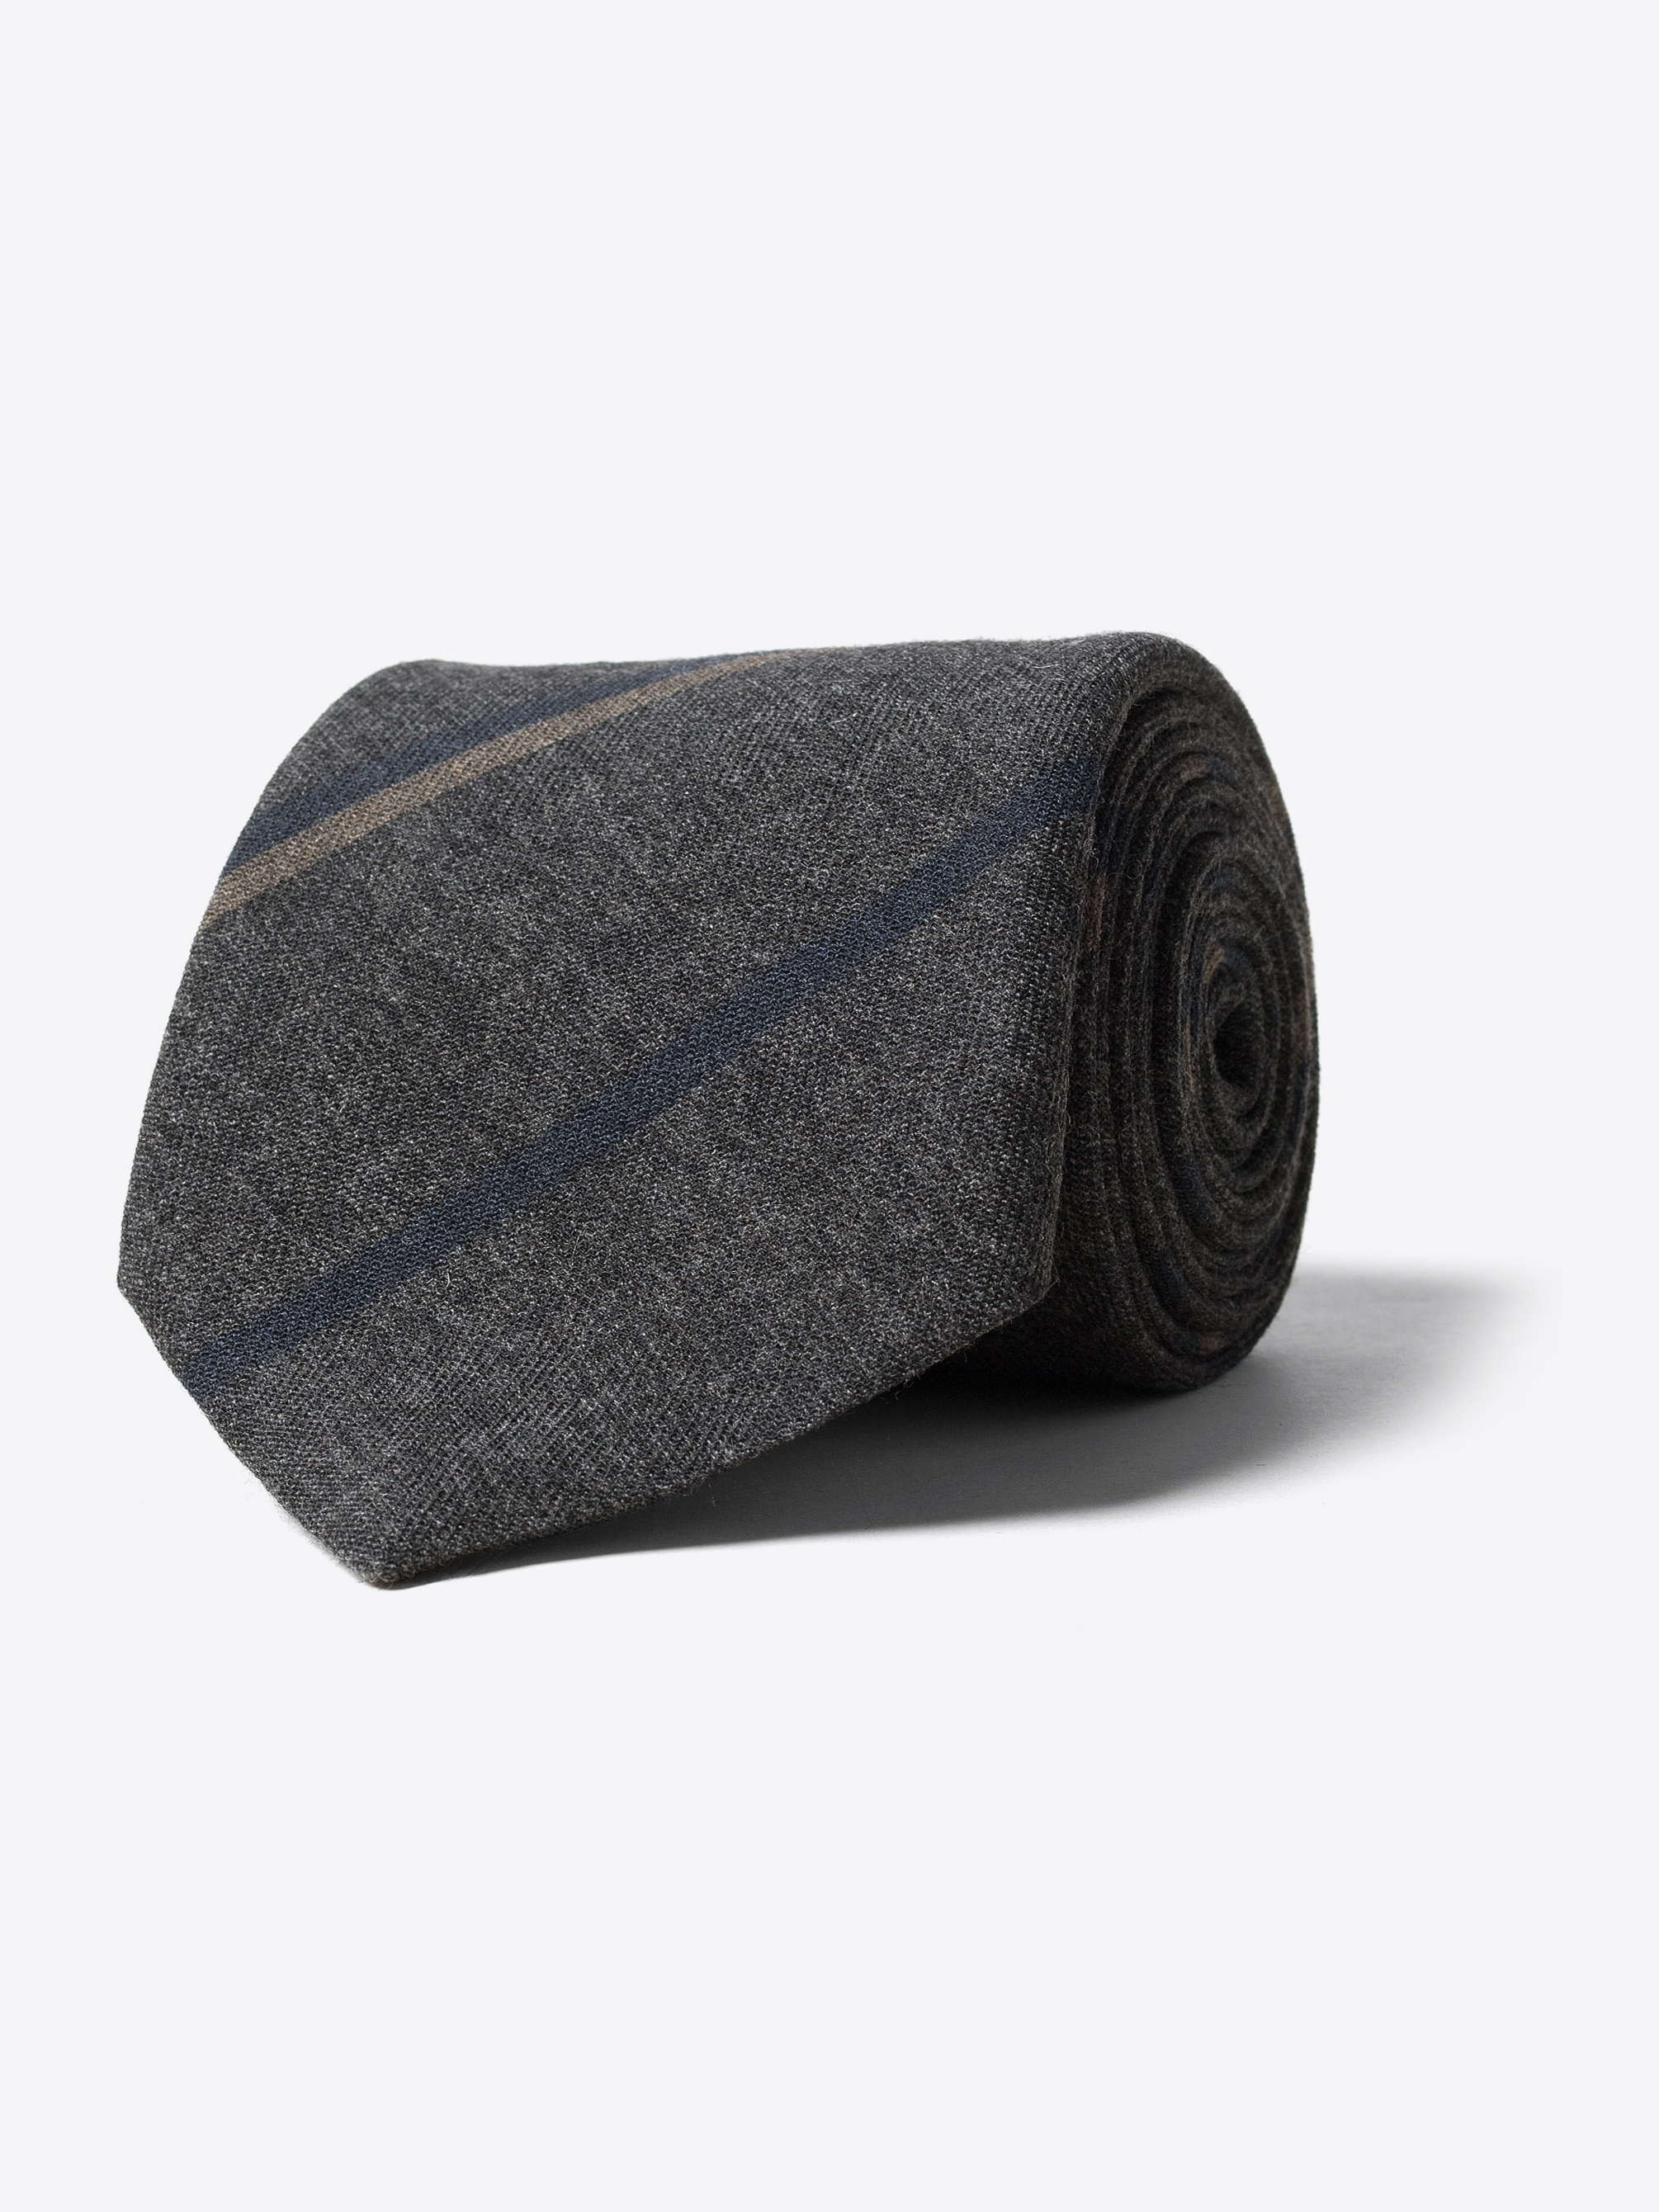 Zoom Image of Grey and Navy Striped Wool Tie